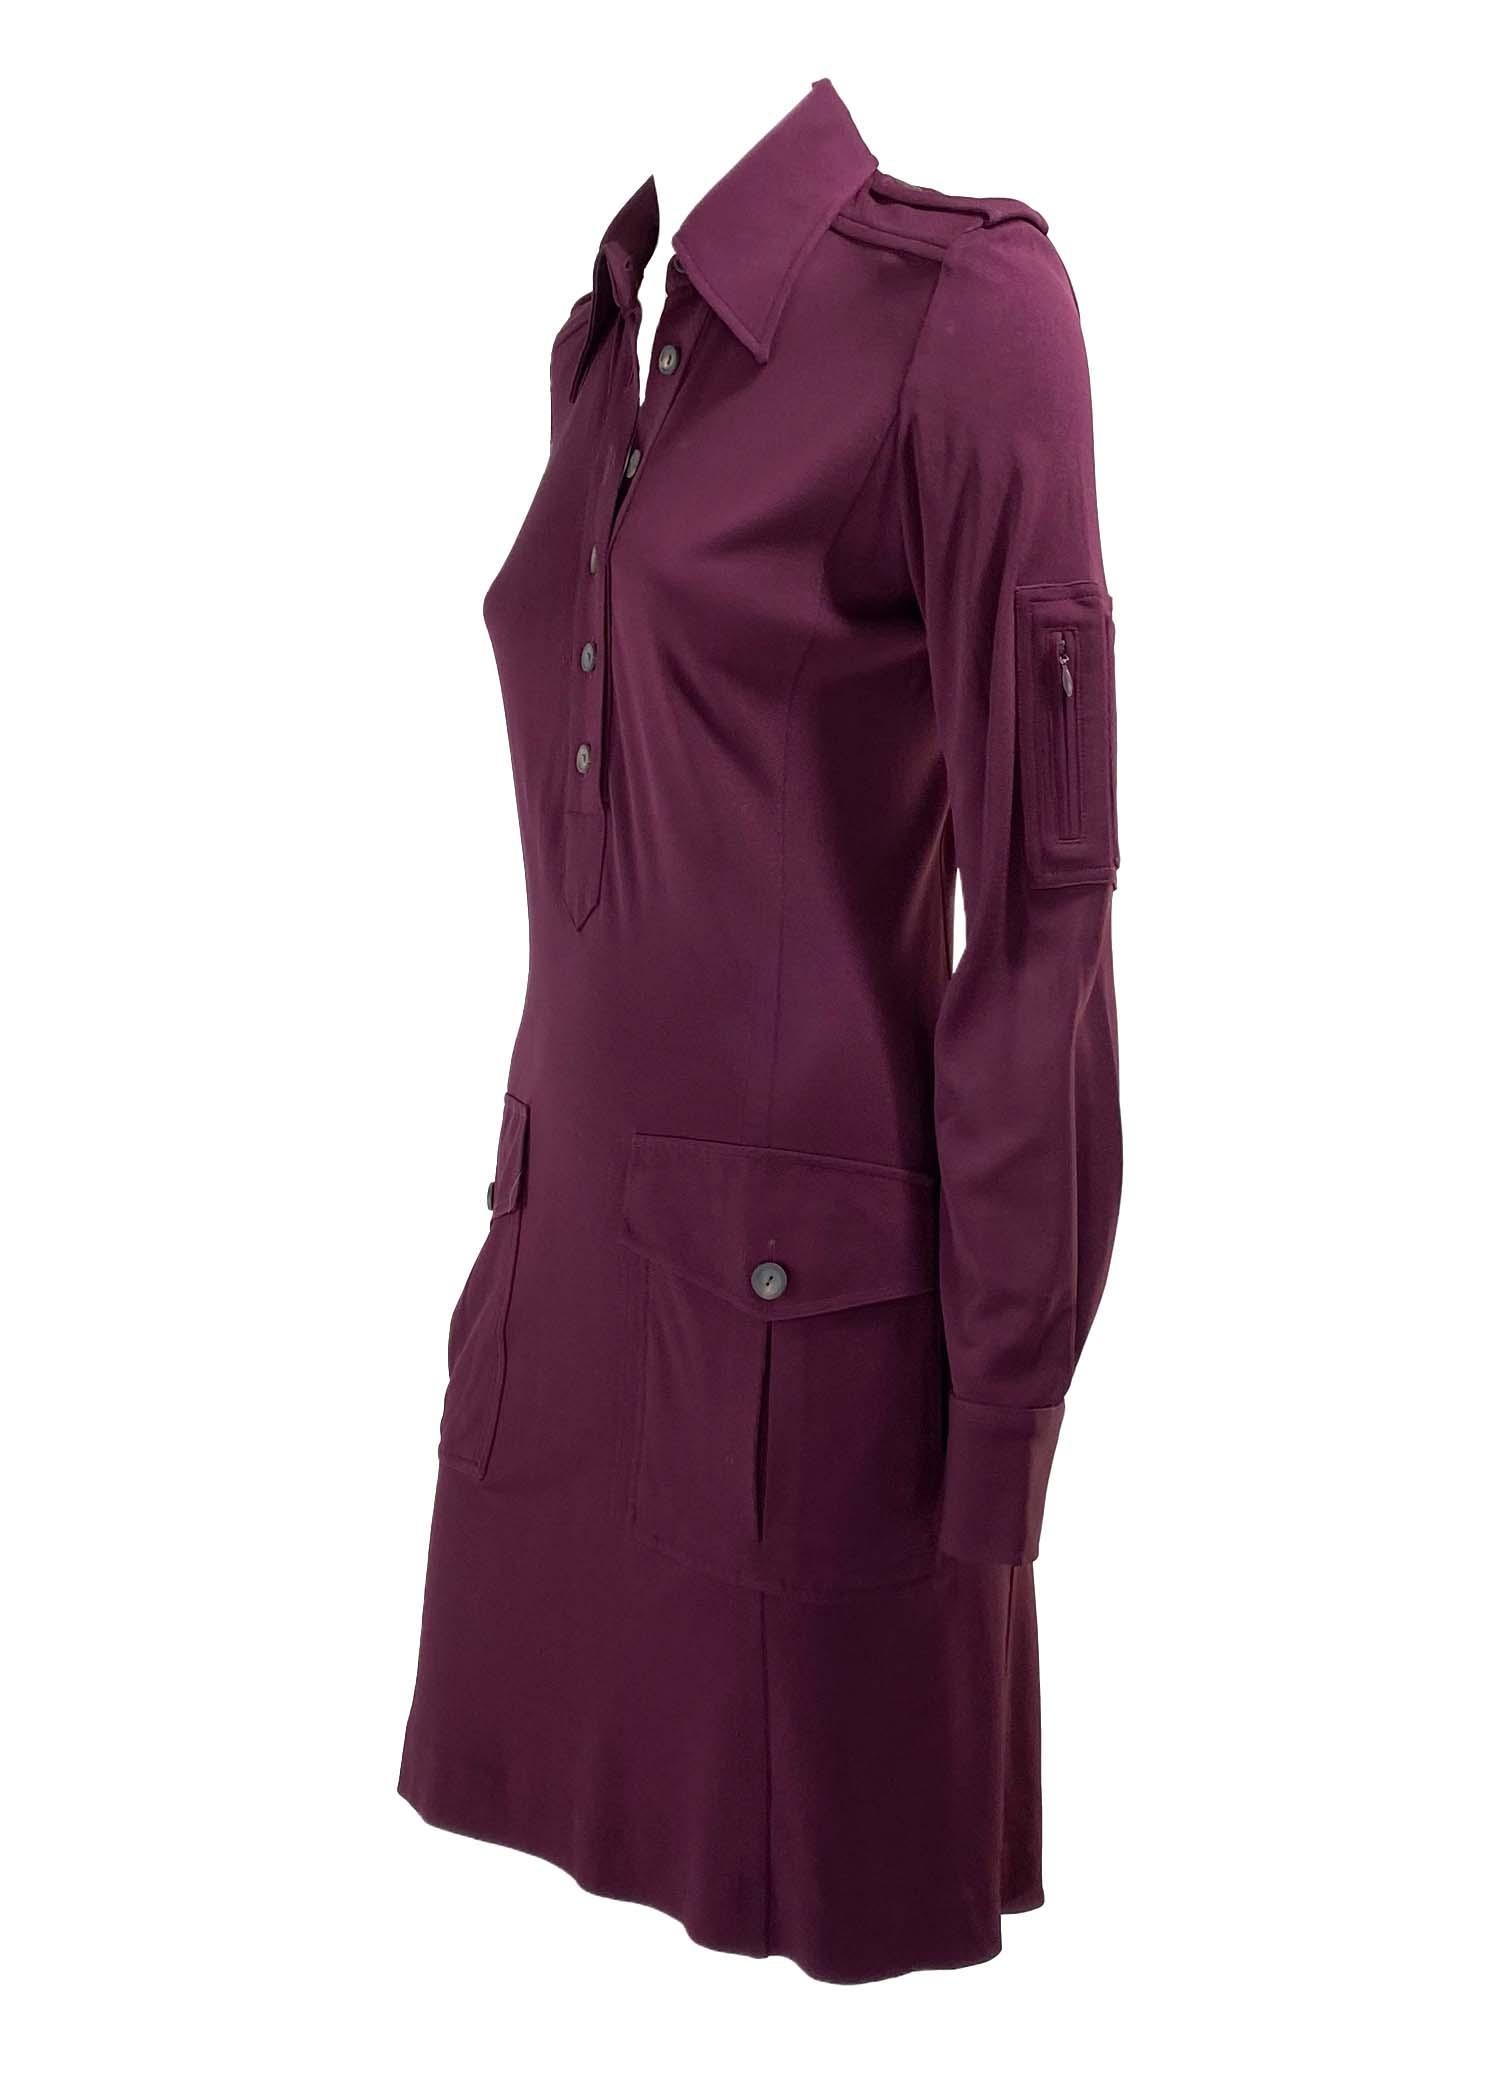 F/W 1996 Gucci by Tom Ford Burgundy Military Inspired Button Up Pocket Dress (Robe à poches boutonnées d'inspiration militaire) Pour femmes en vente